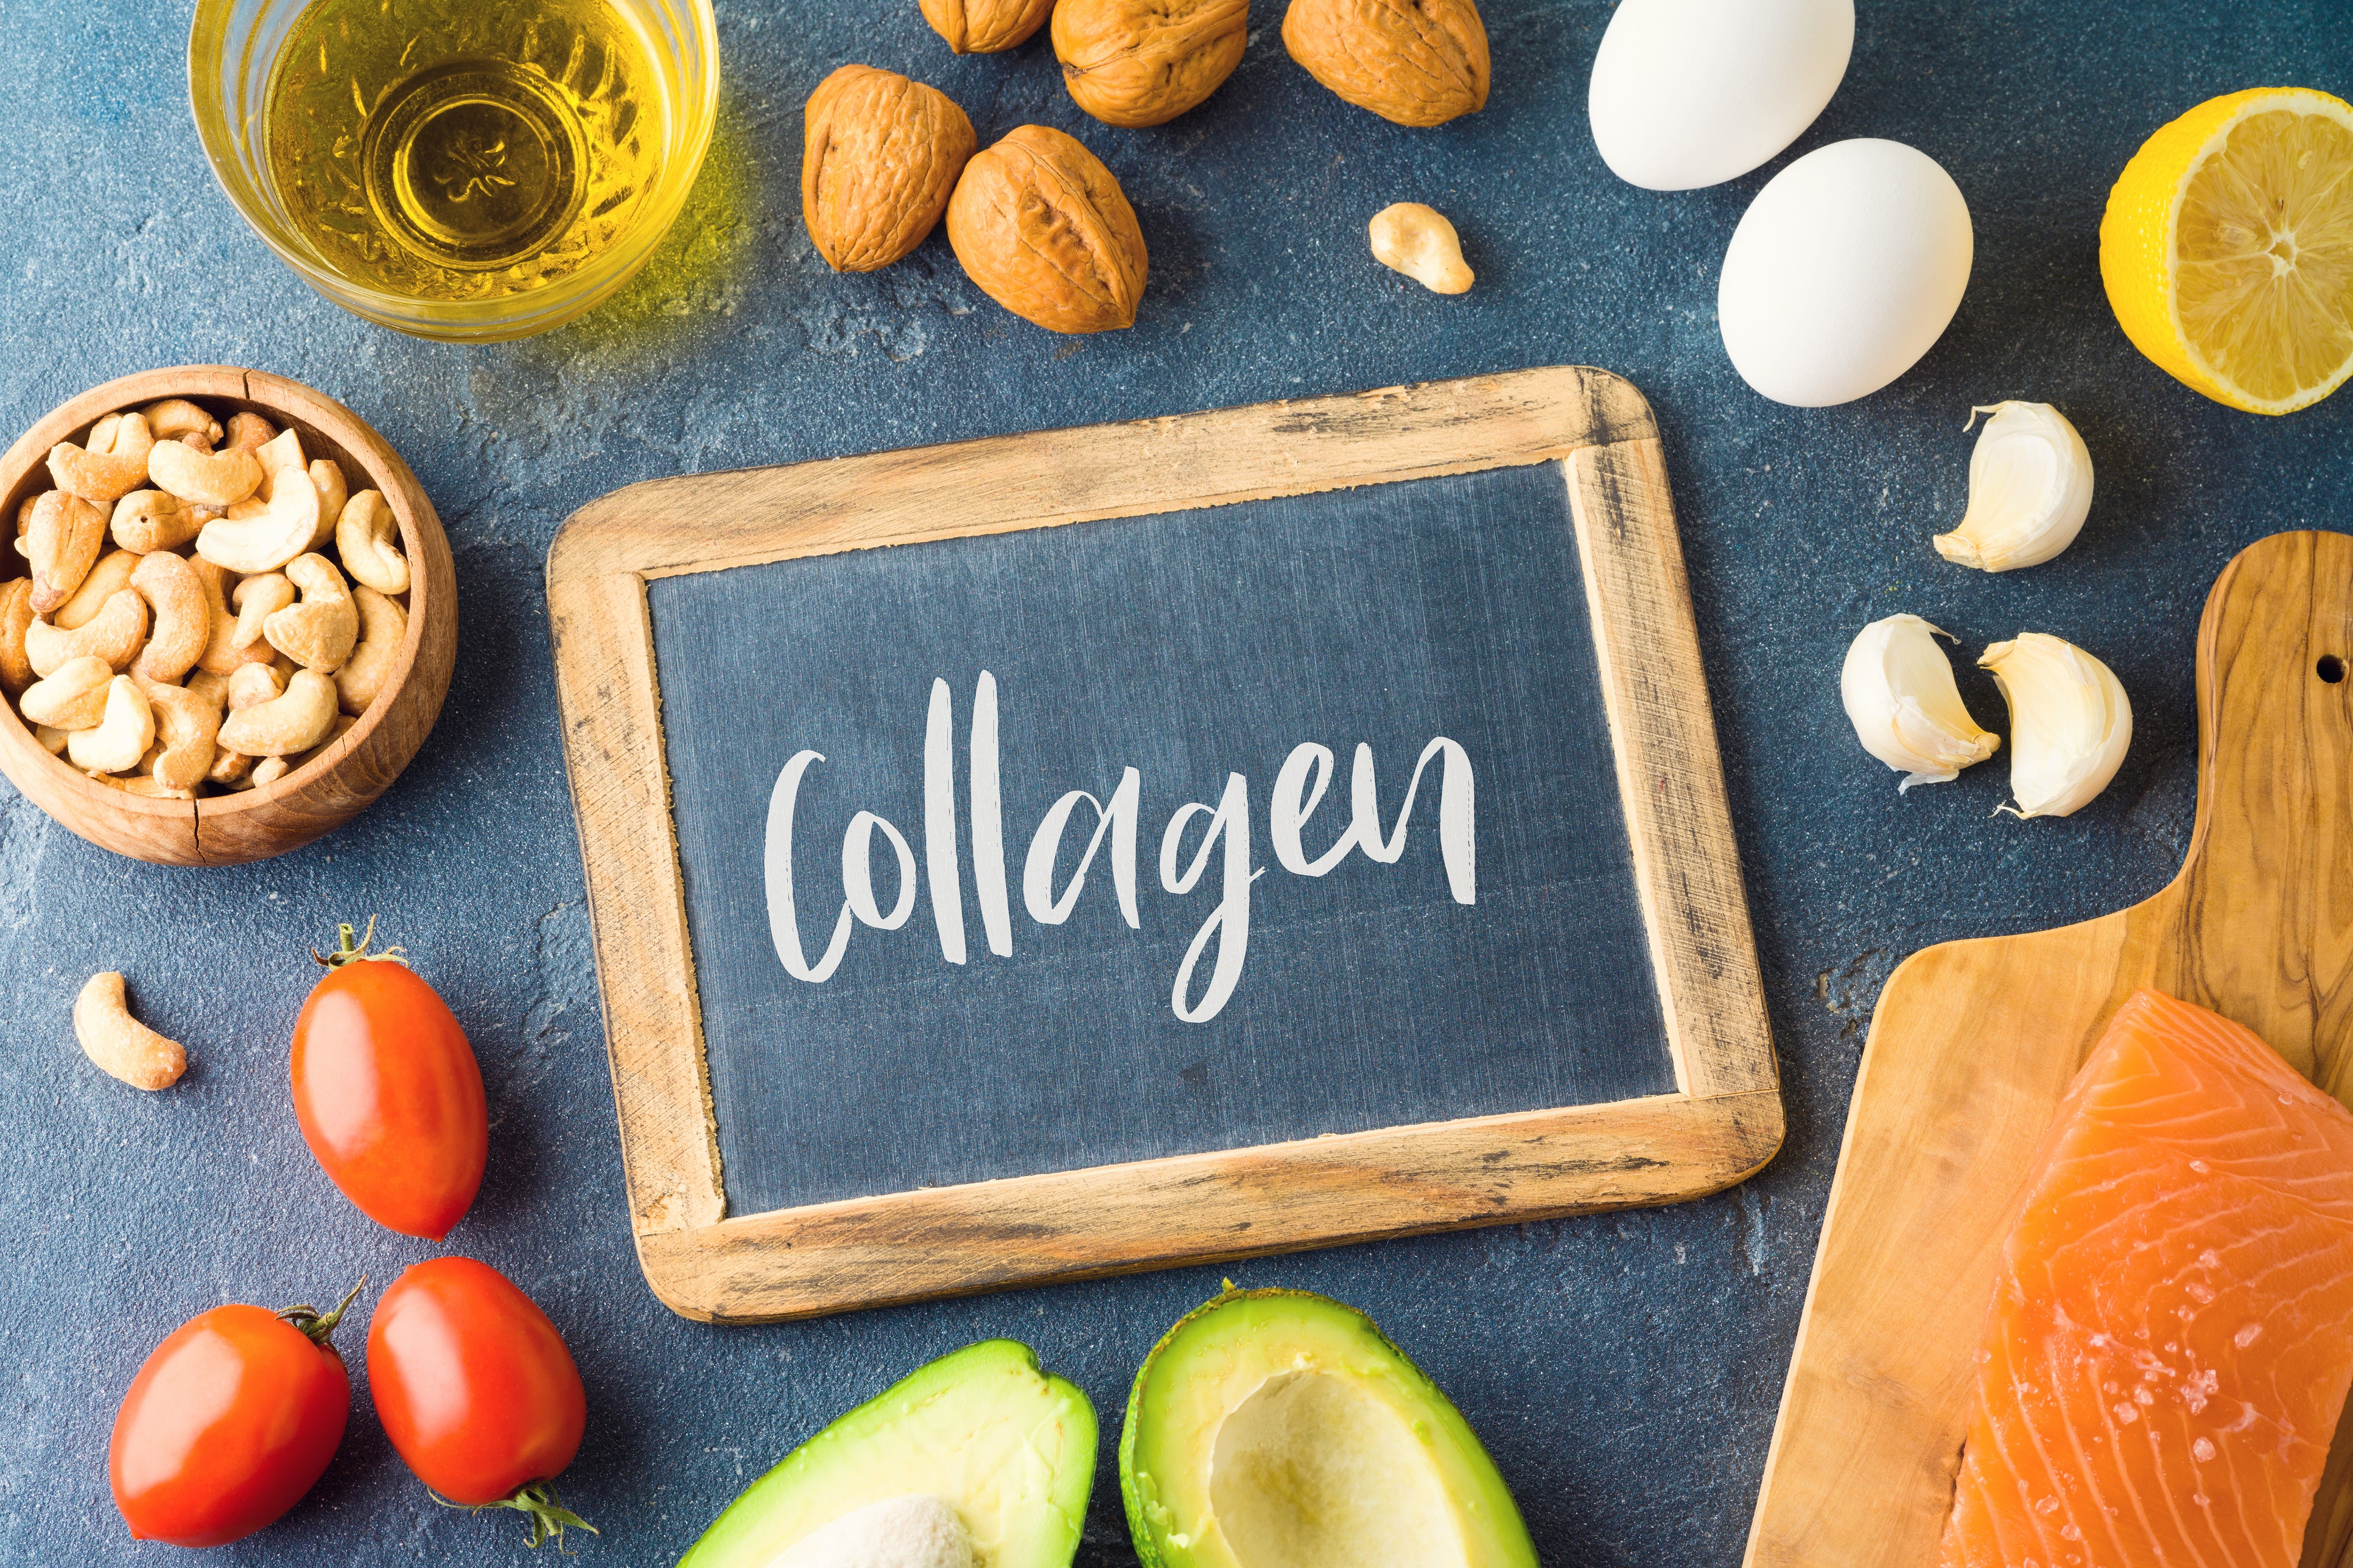 Collagen Supplements for Skin, Bone, and Tendon Support — What to Look For?